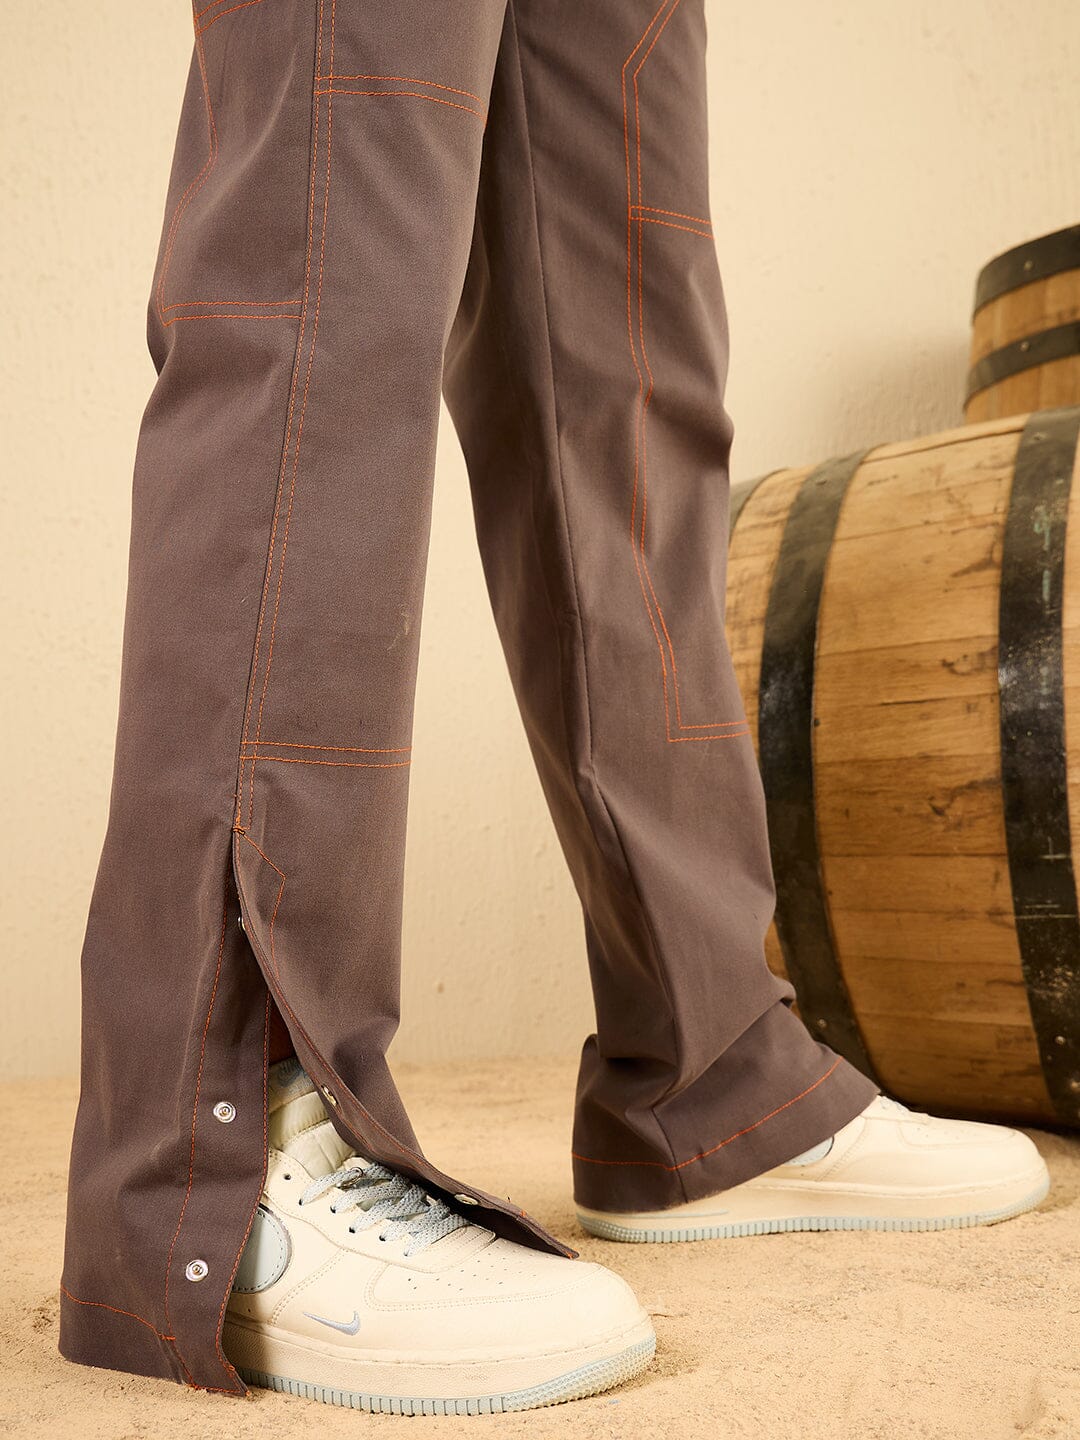 Discover more than 145 kegs trousers super hot